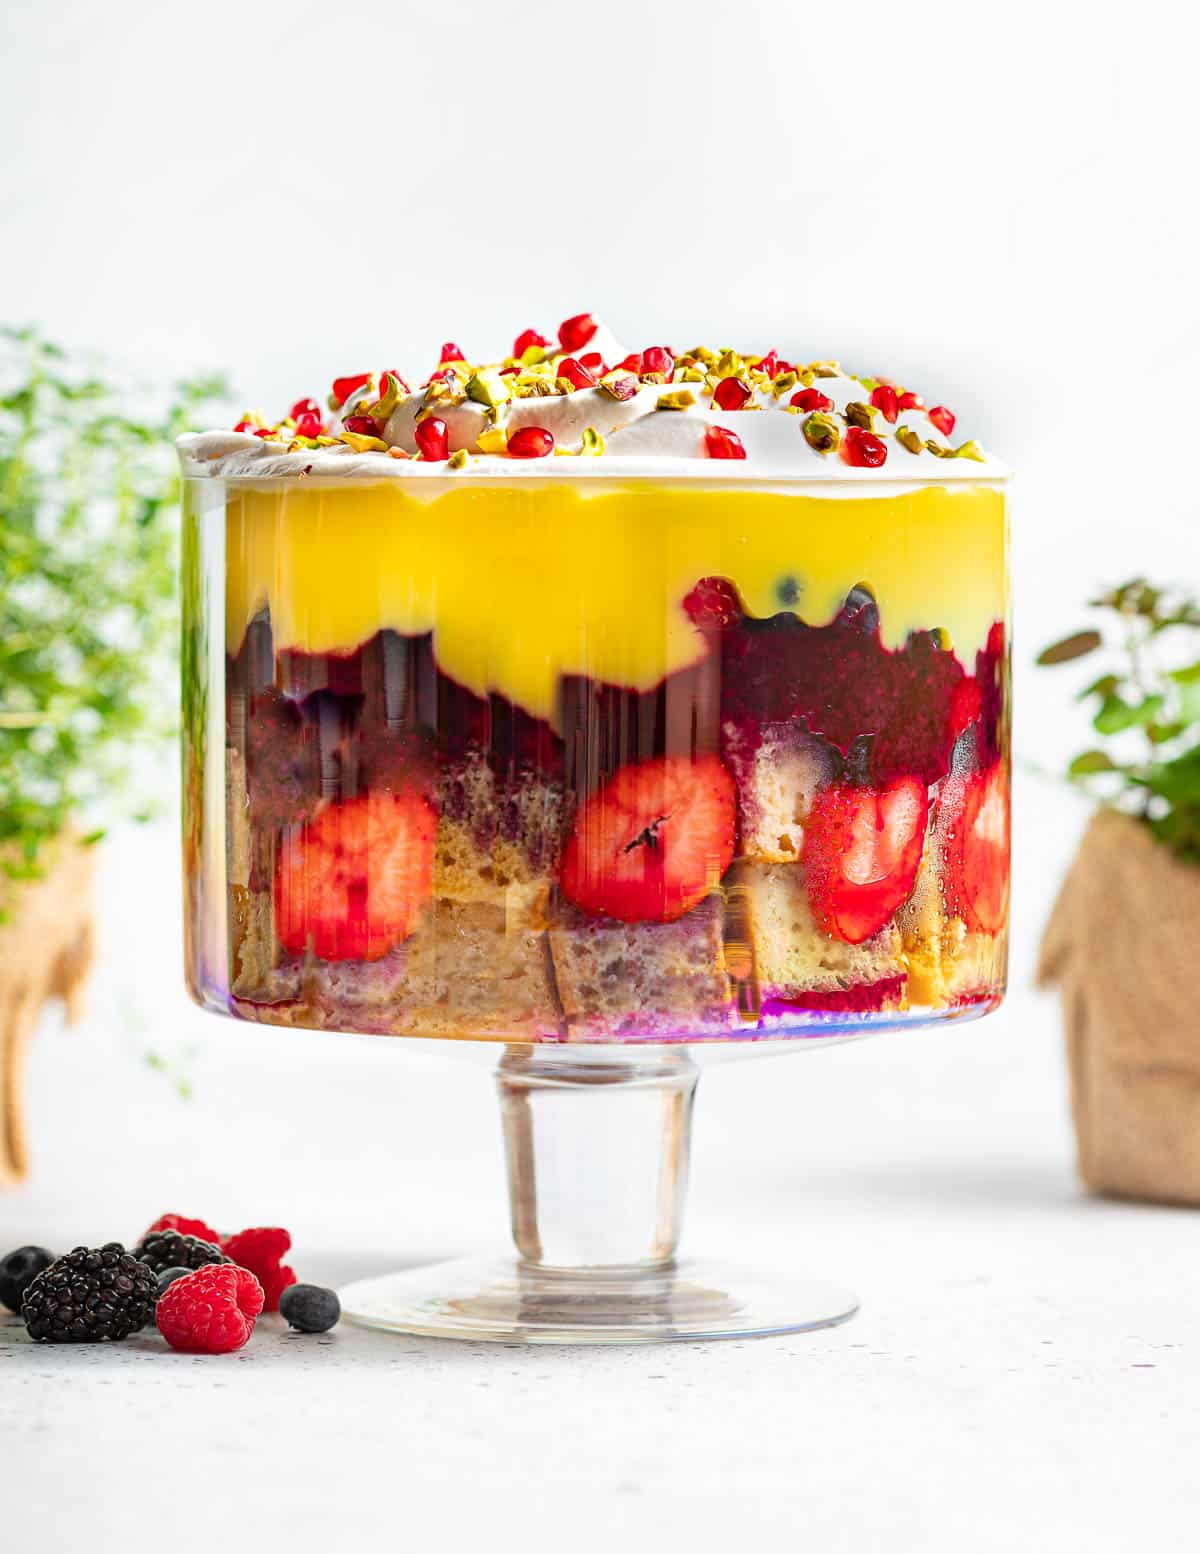 a vegan trifle served in a large glass dish for trifle. All the layers are clearly visible and you can spot strawberries and custard. Decorates with vegan whipped cream and pomegranate seeds on top.